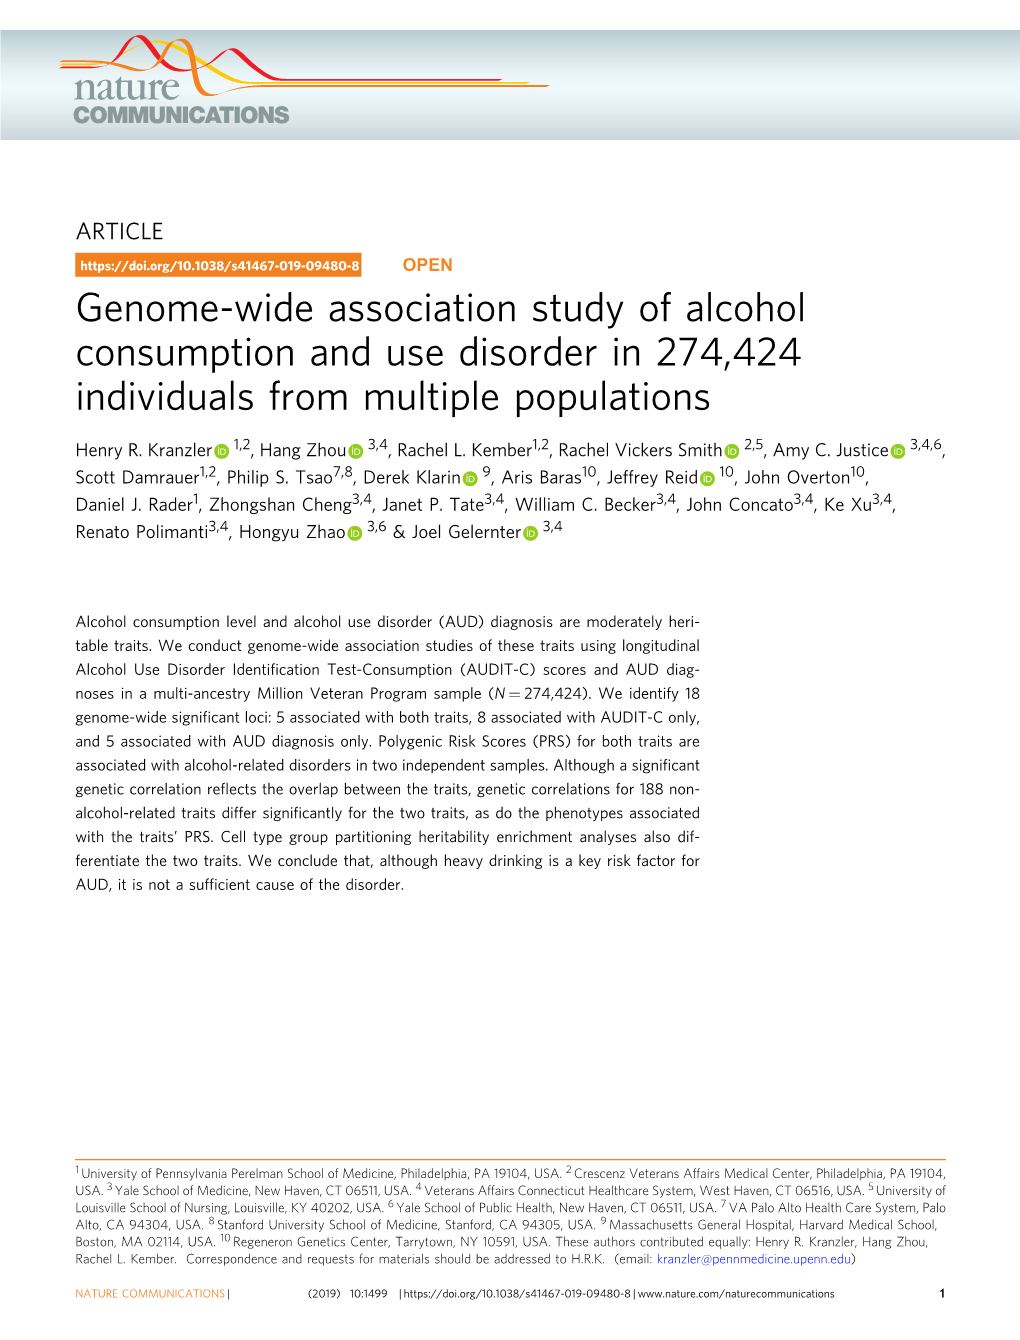 Genome-Wide Association Study of Alcohol Consumption and Use Disorder in 274,424 Individuals from Multiple Populations